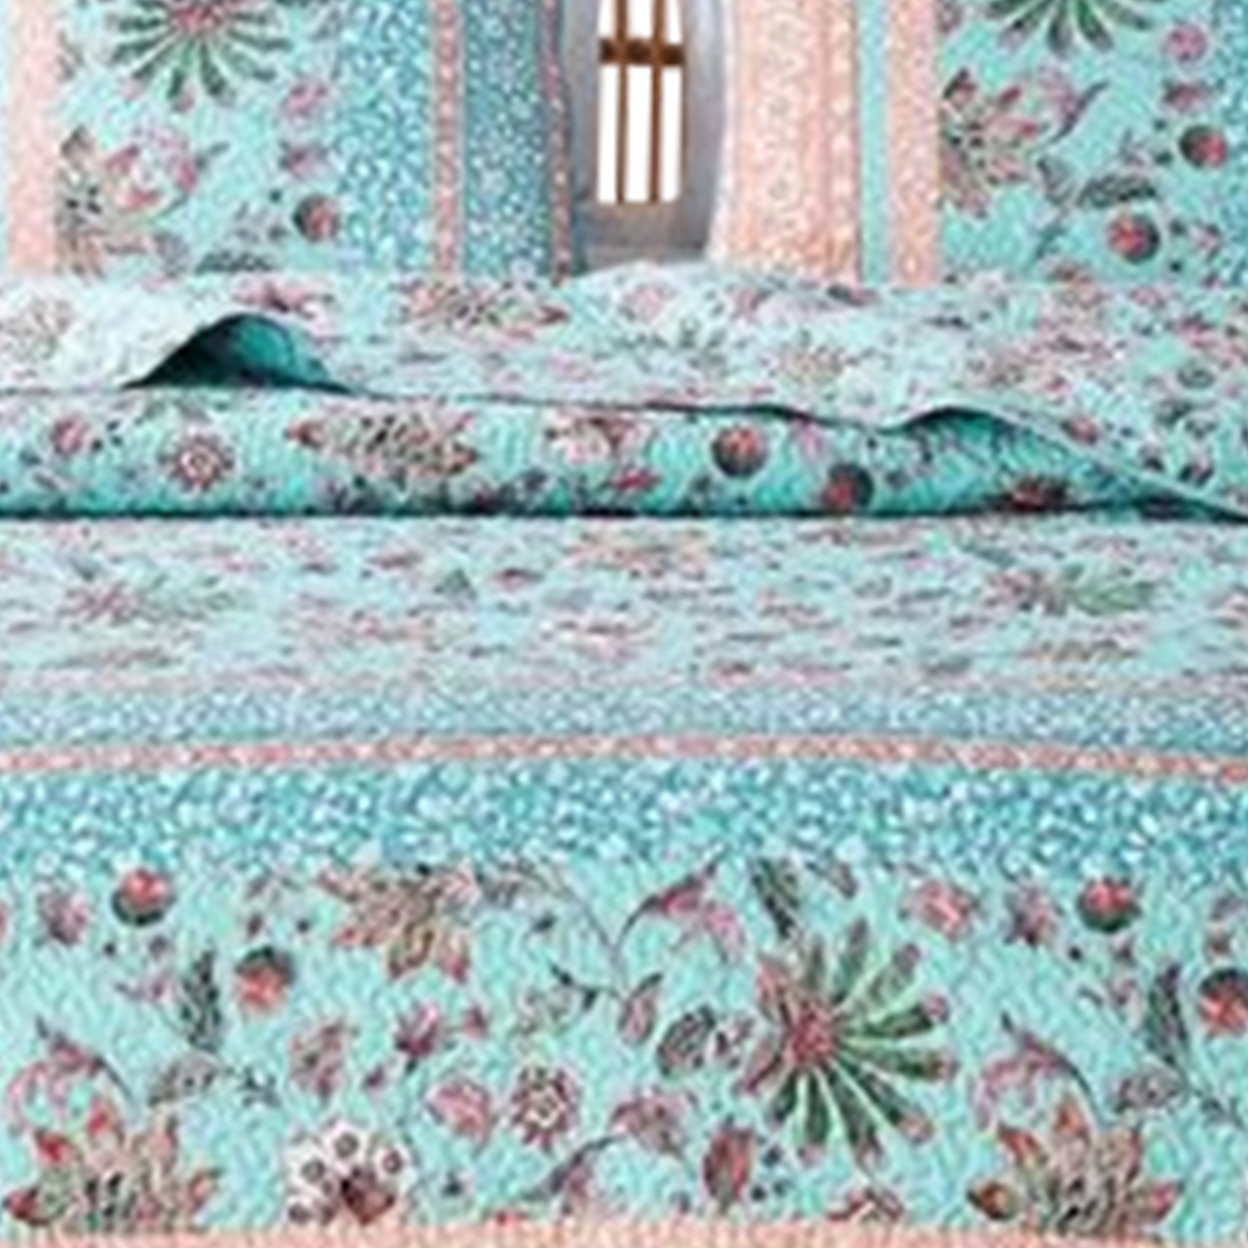 2 Piece Twin Quilt Set With Floral Print, Blue And White- Saltoro Sherpi